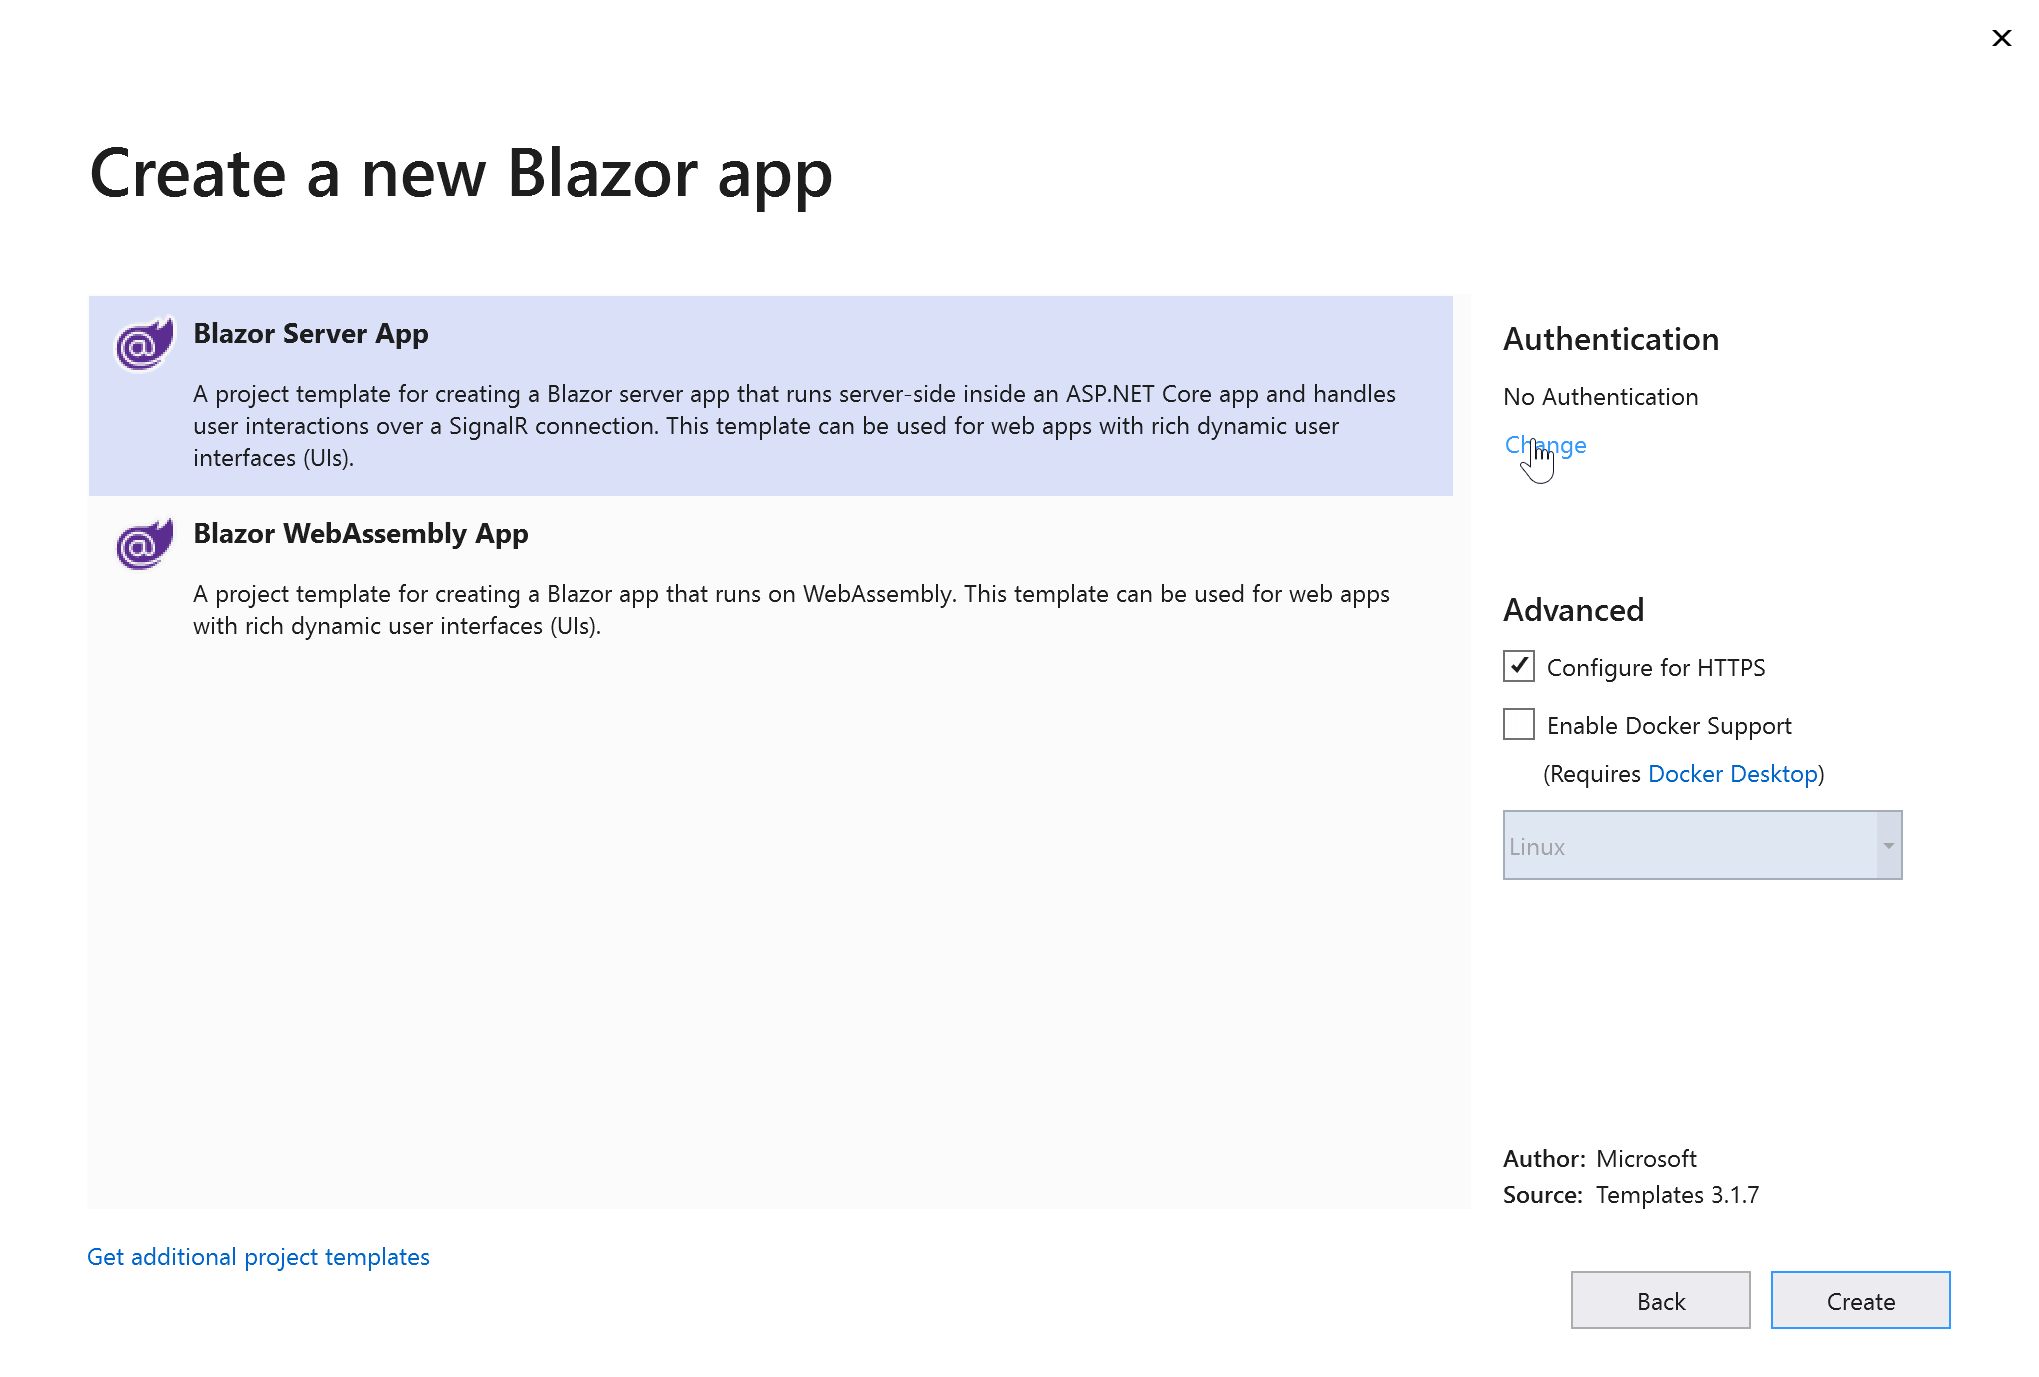 Choose Blazor Server App and select the Change option from the Authentication section